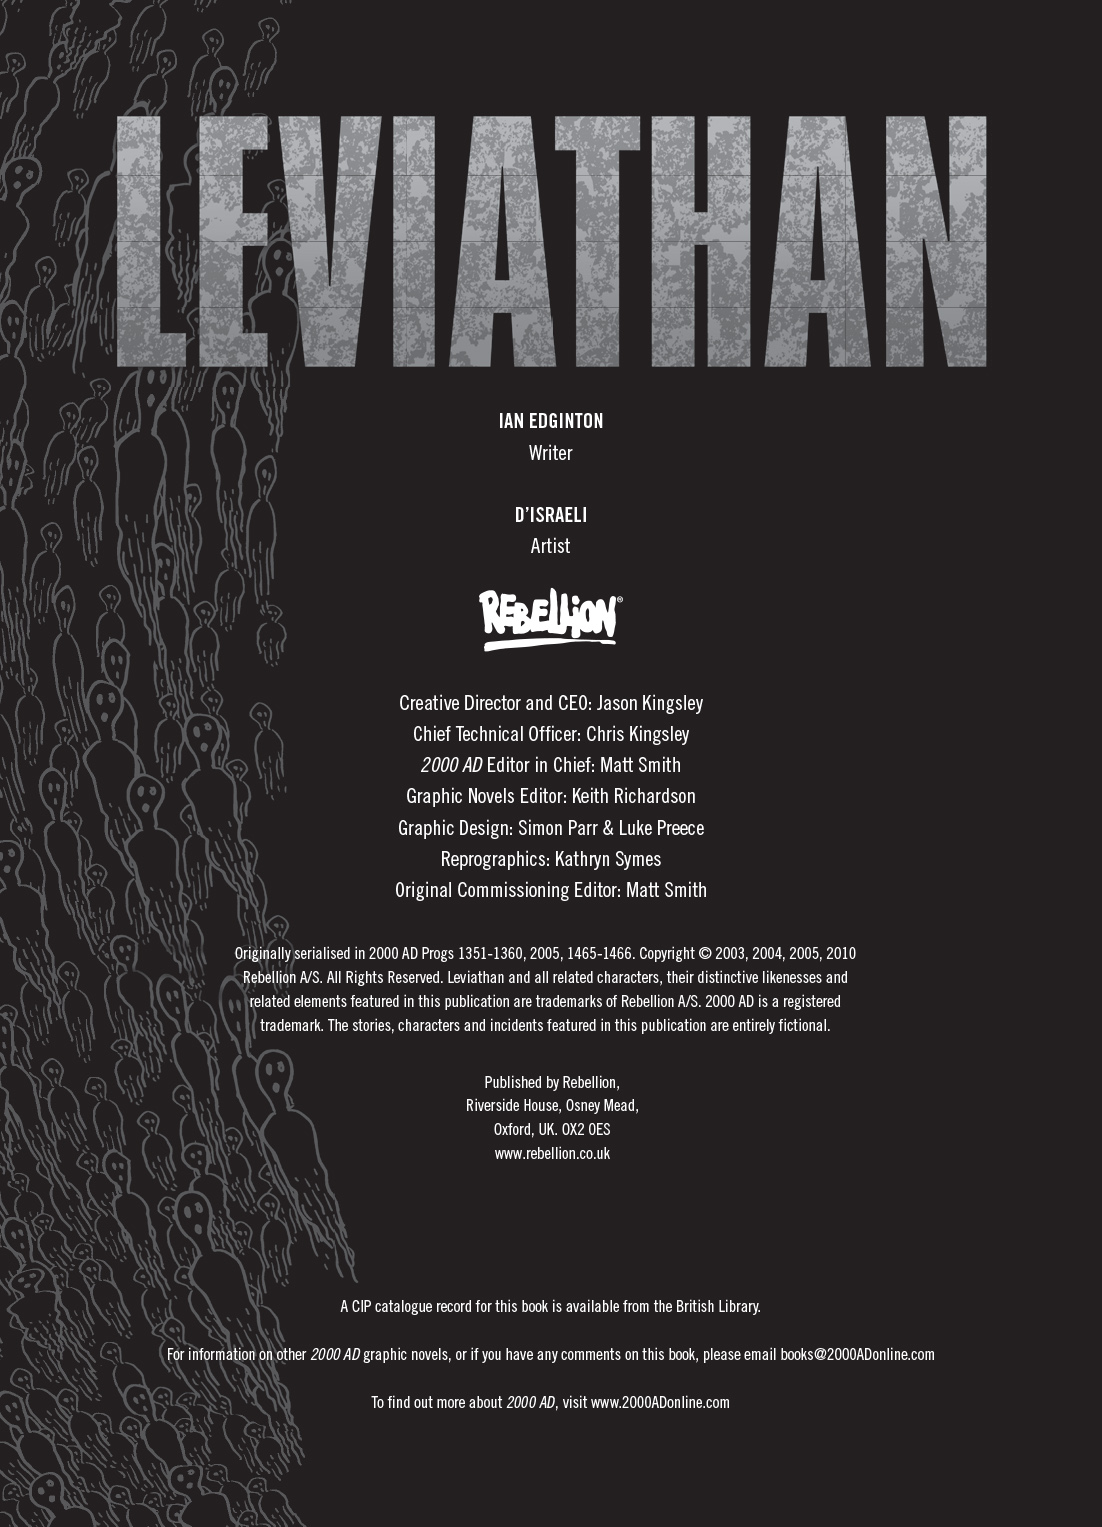 Read online Leviathan (2000 AD) comic -  Issue # TPB - 4